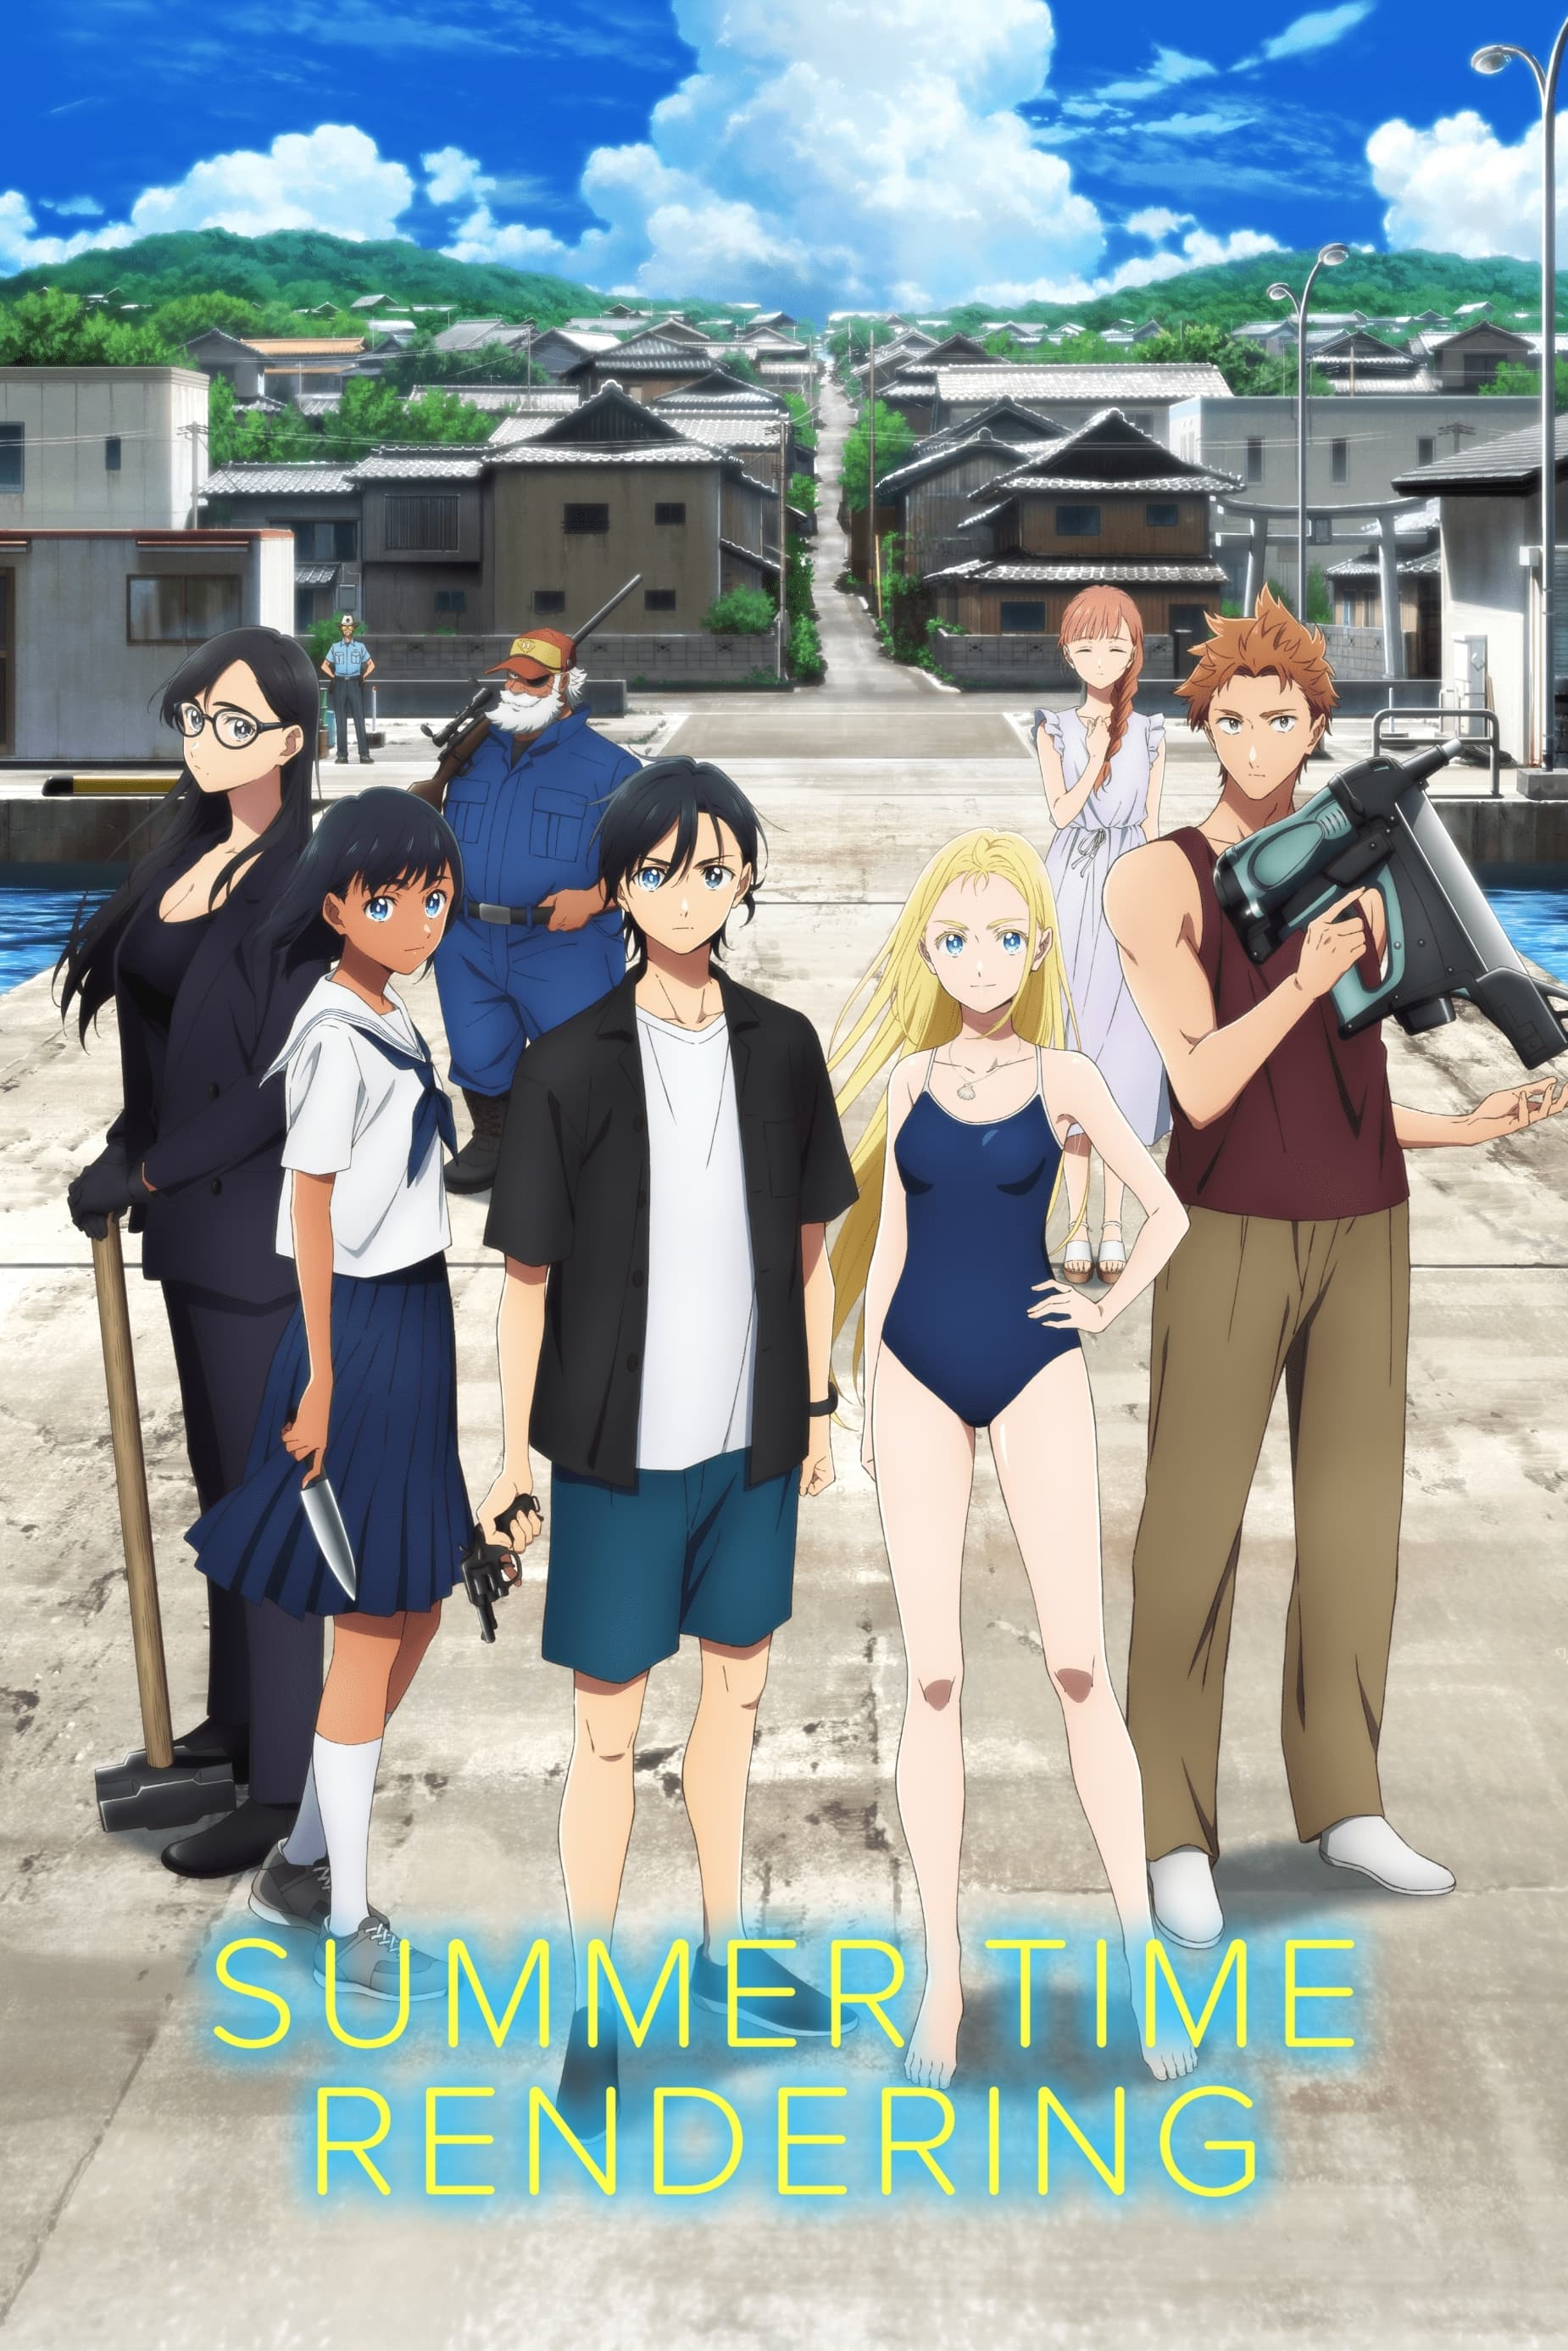 Video Game For Summer Time Rendering Anime Announced By MAGES